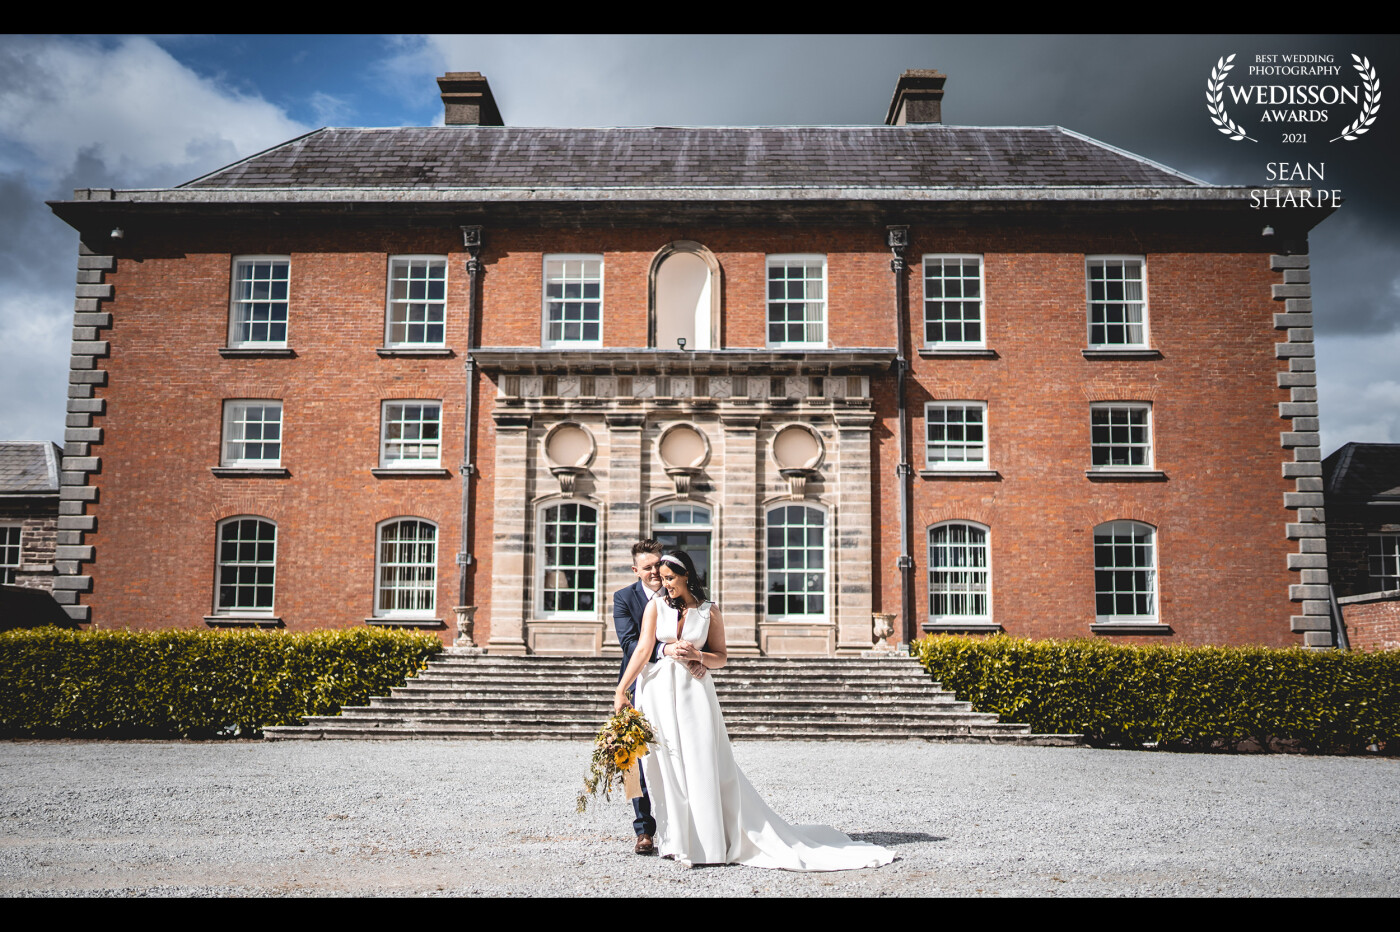 Not many people get the shoot their weddings at the beautiful Kilshannig Stud Farm, Co. Cork! We were one of the lucky ones! With a day filled of heavy rain downpours, the sun came out strong and completely lit the house and couple up just long enough to get the shot.